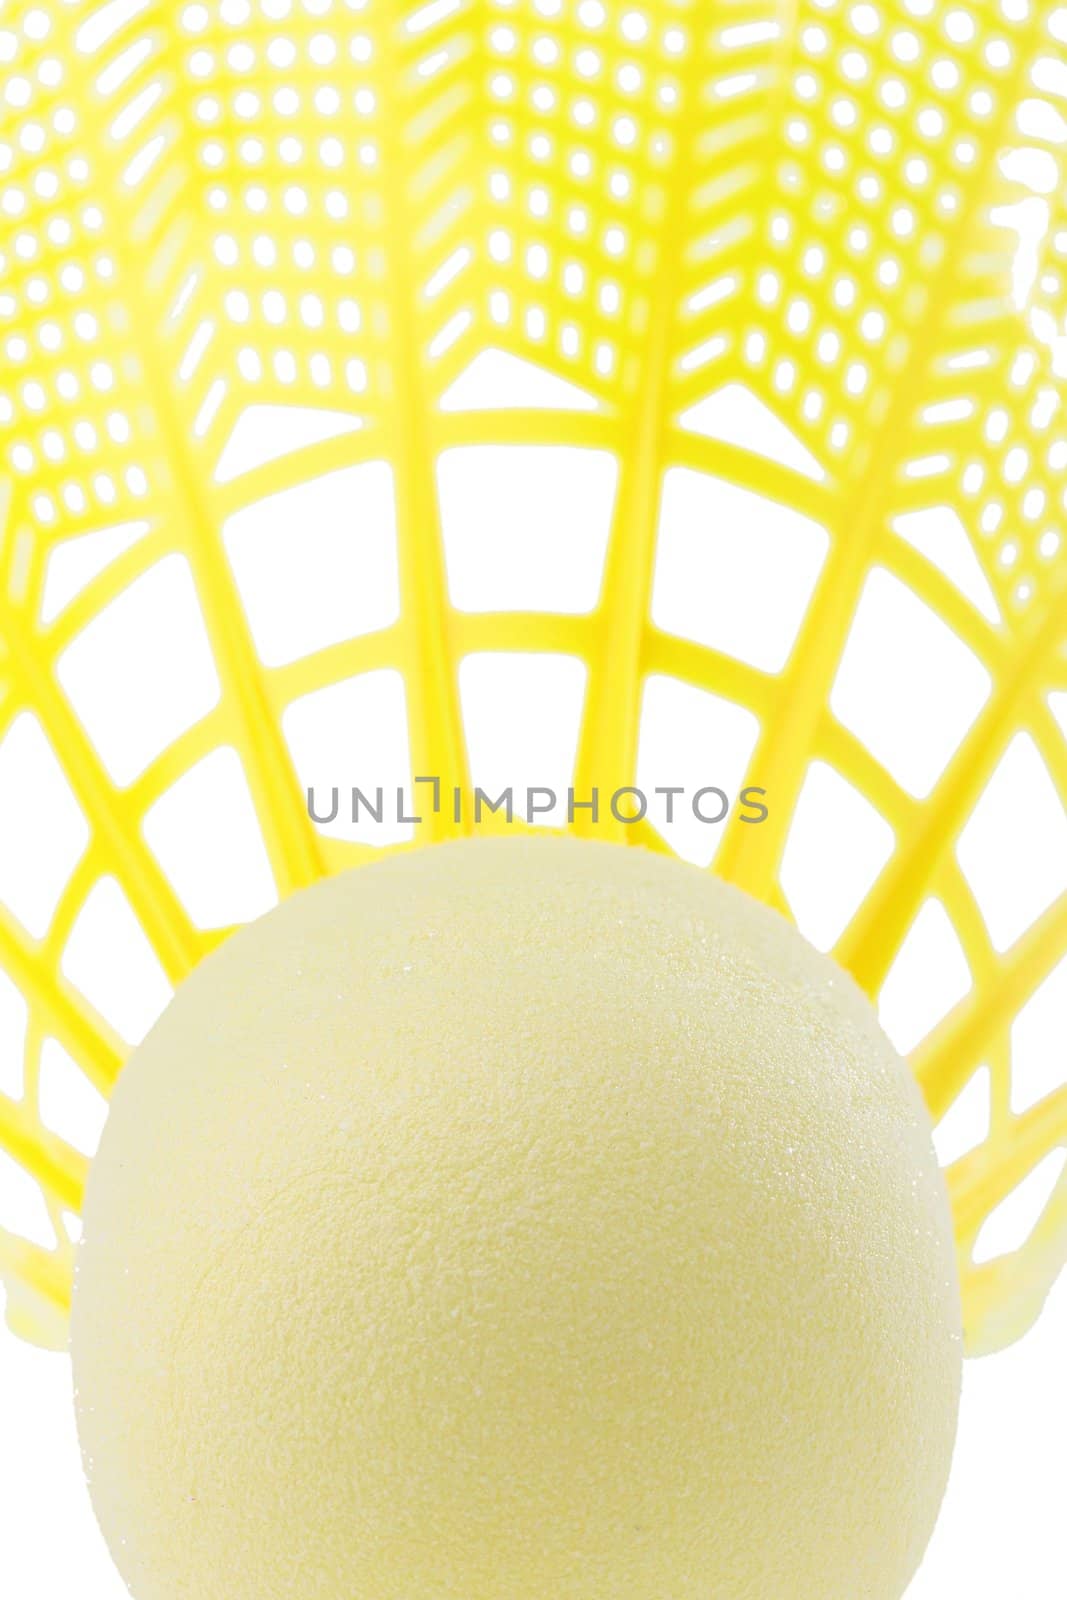 Close-up of a bright yellow badminton shuttlecock on a white background.